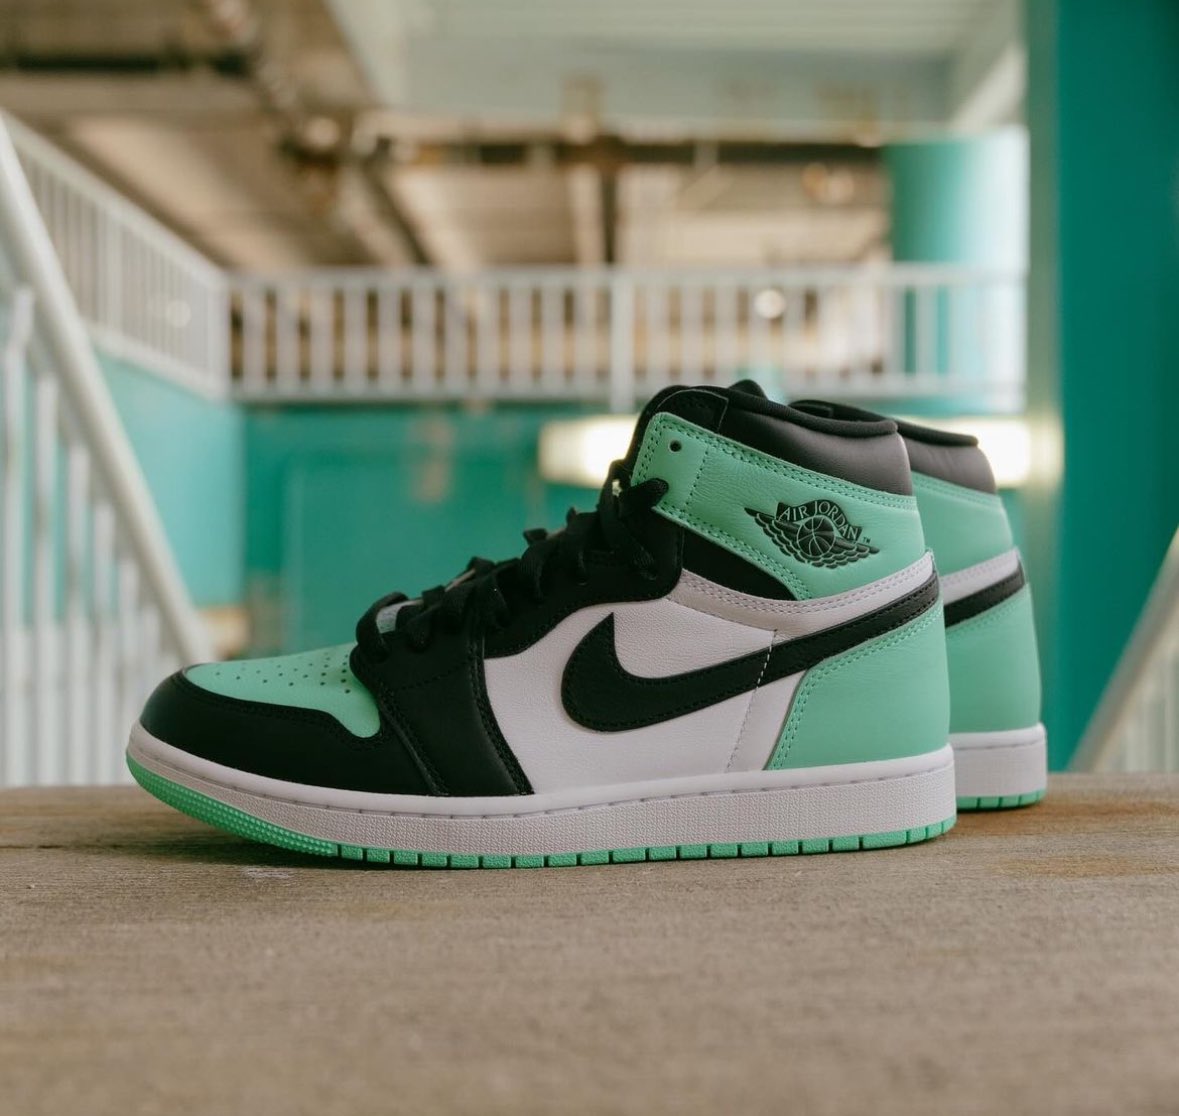 With a white leather base paired with black overlays and a vibrant green leather on the toe box, heel, ankle, and outsole, the Air Jordan 1 High OG “Green Glow” is set to drop Saturday, April 20th, and will release FCFS online and at all three of our locations.